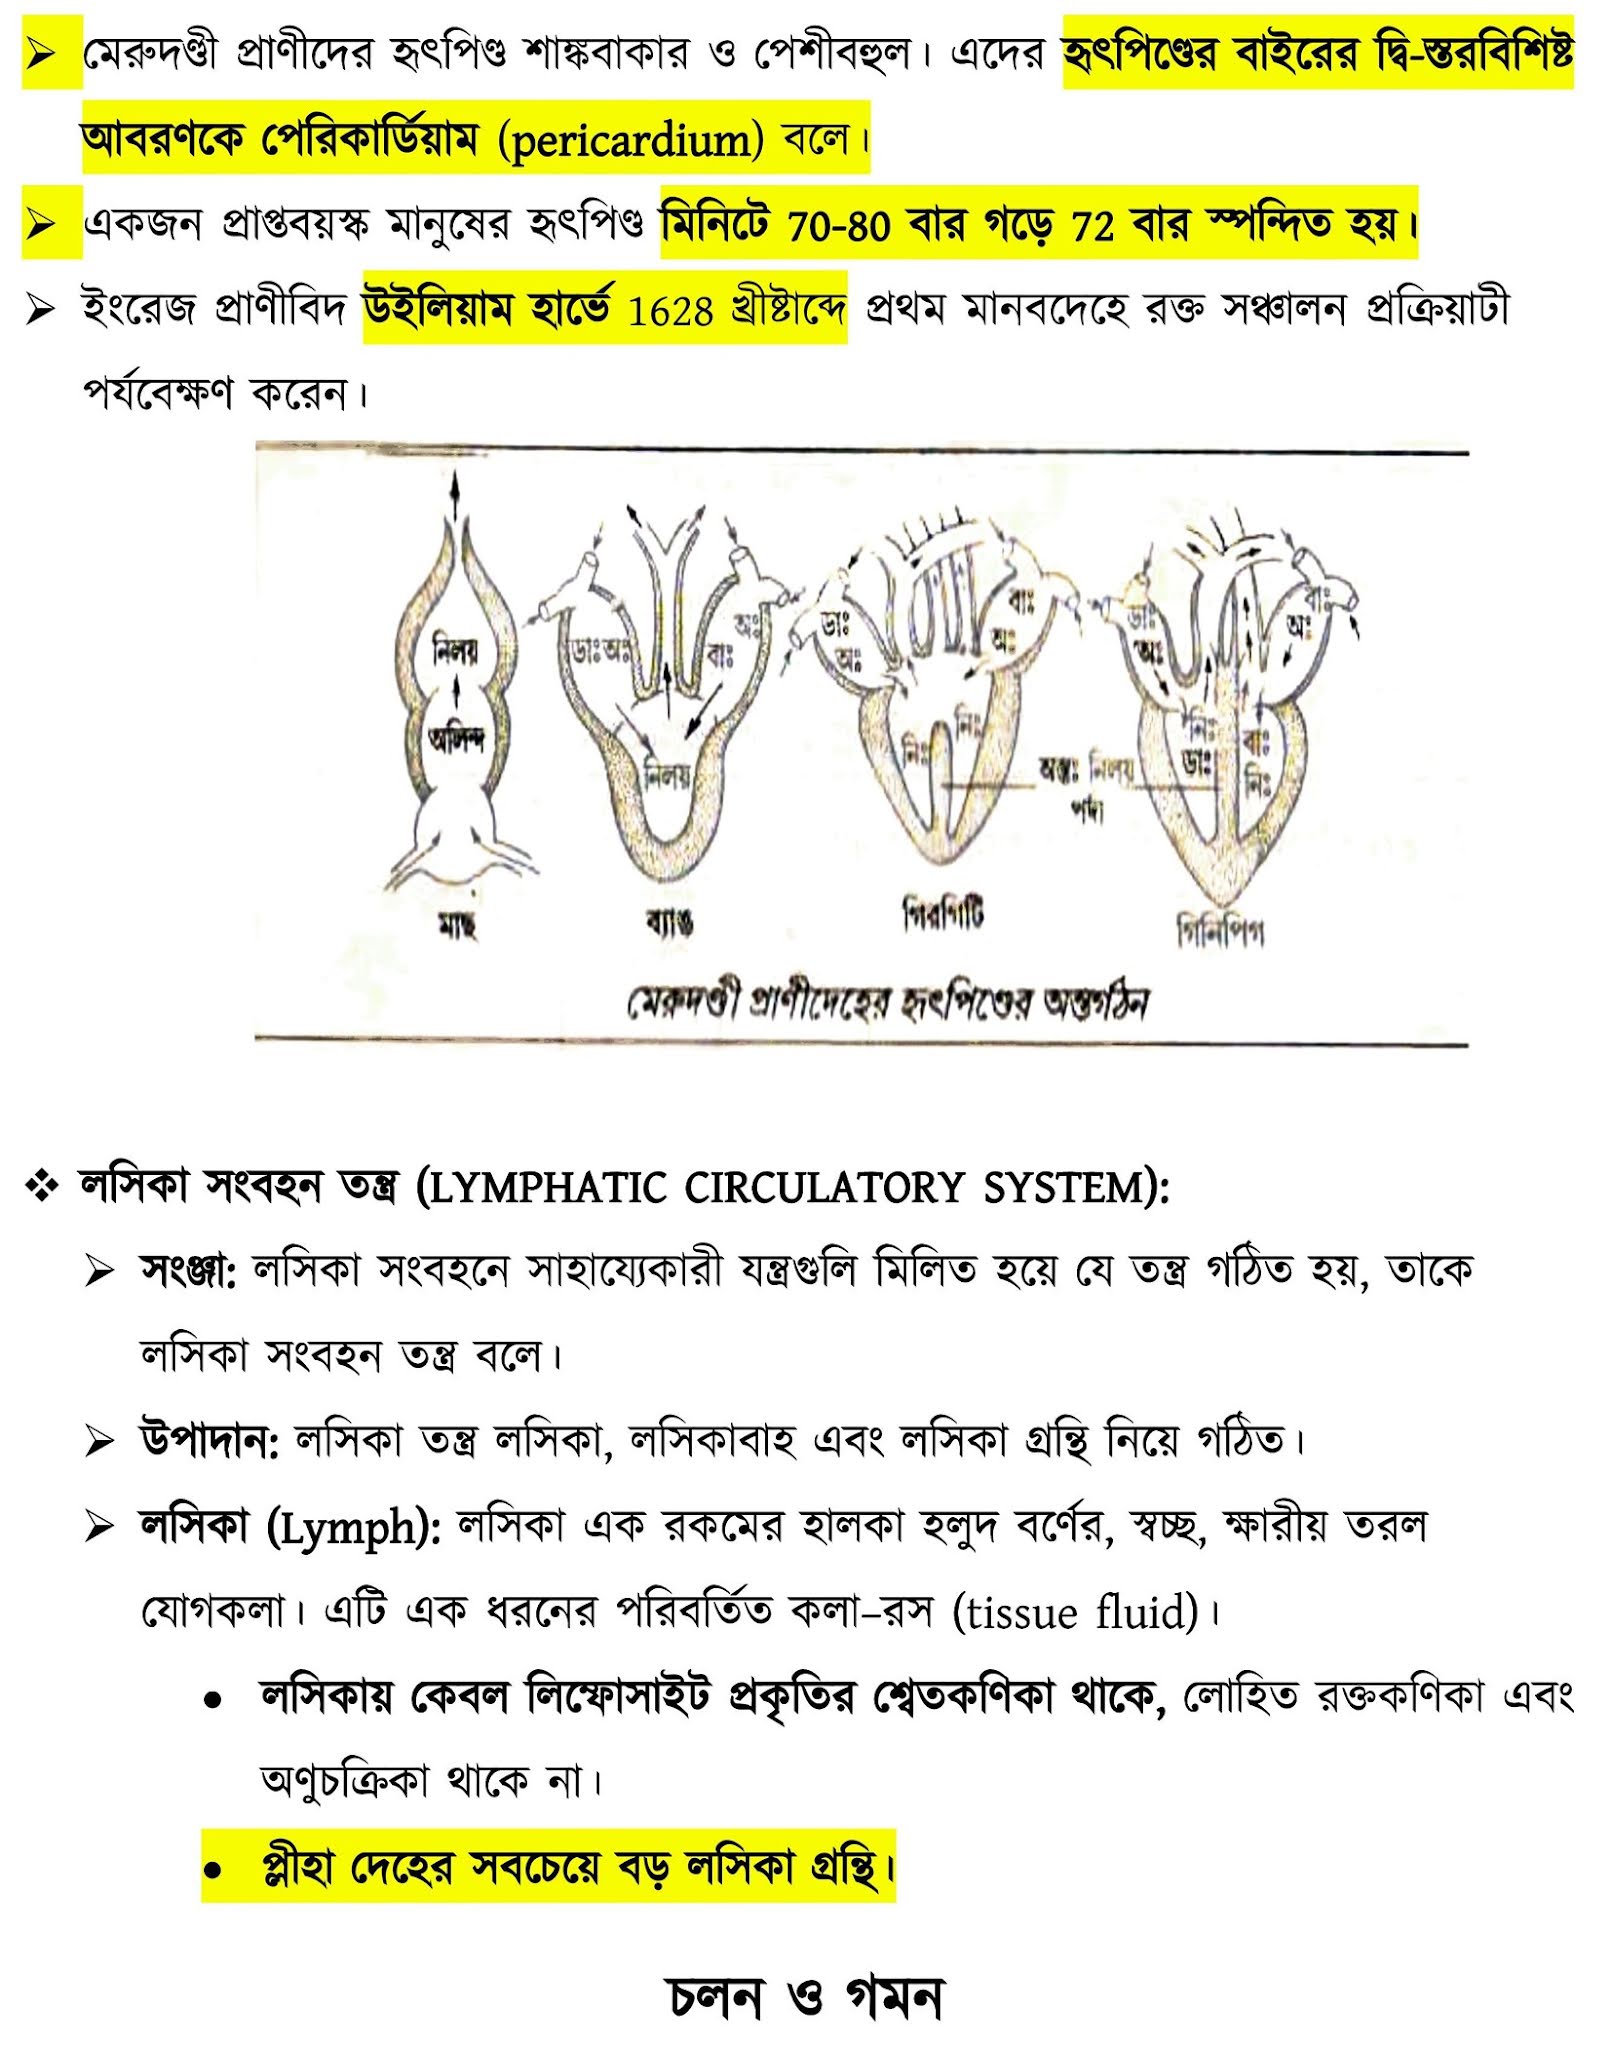 Life Science Complete Syallabus Study Material - WBCS Notebook